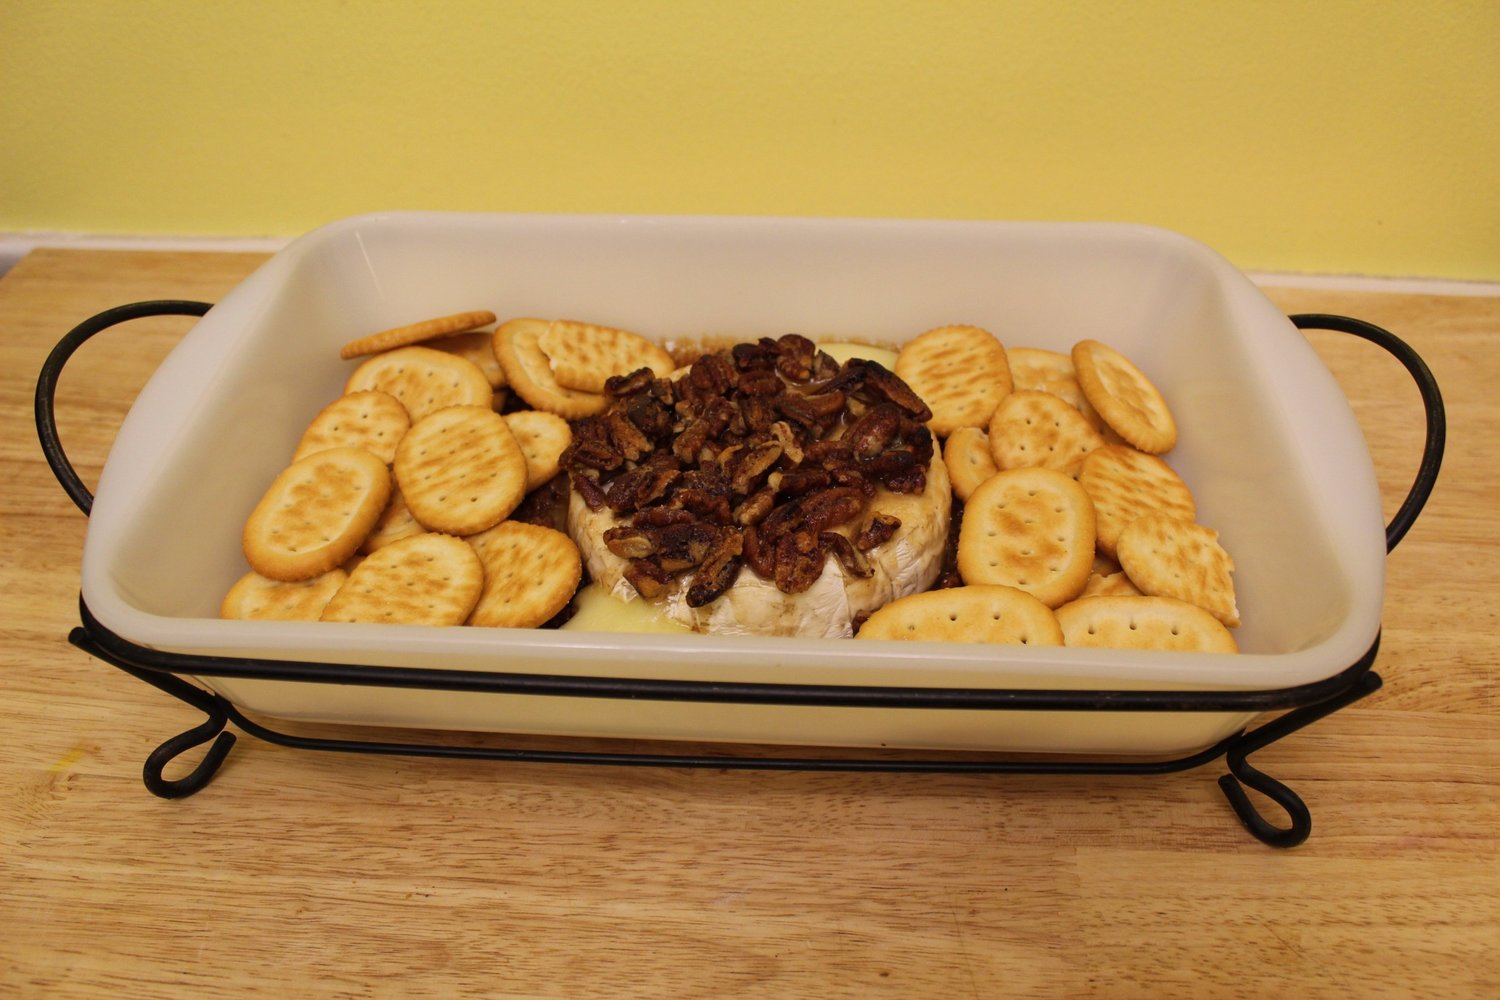 Baked Brie is a quick and simple showstopper for any get together.